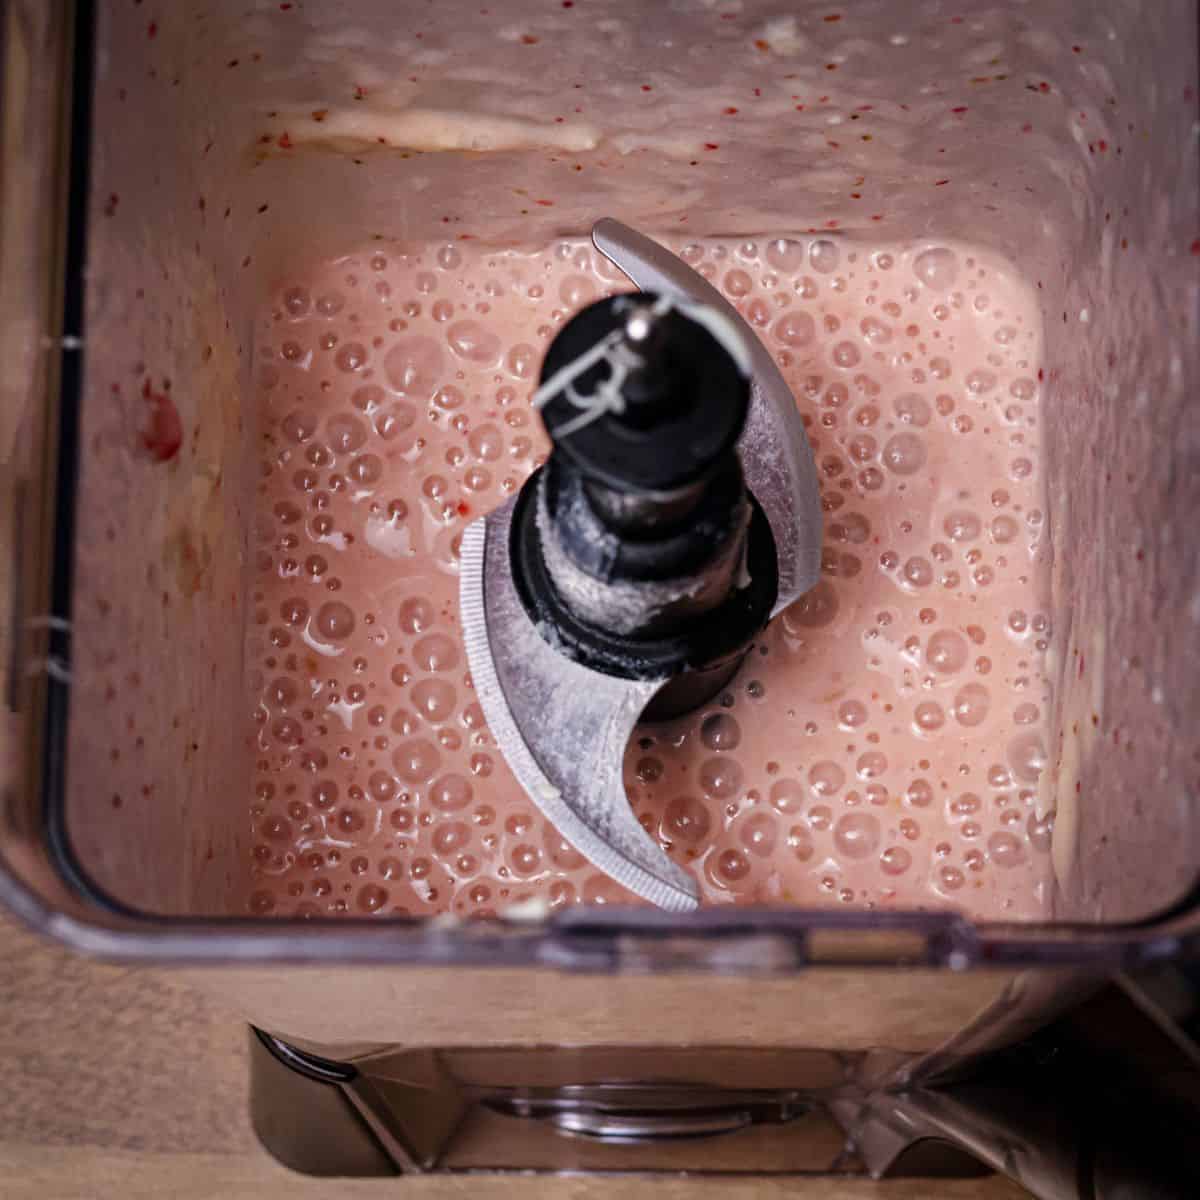 A creamy pink strawberry banana smoothie blend inside a blender, with bubbles on the surface indicating a freshly blended texture.